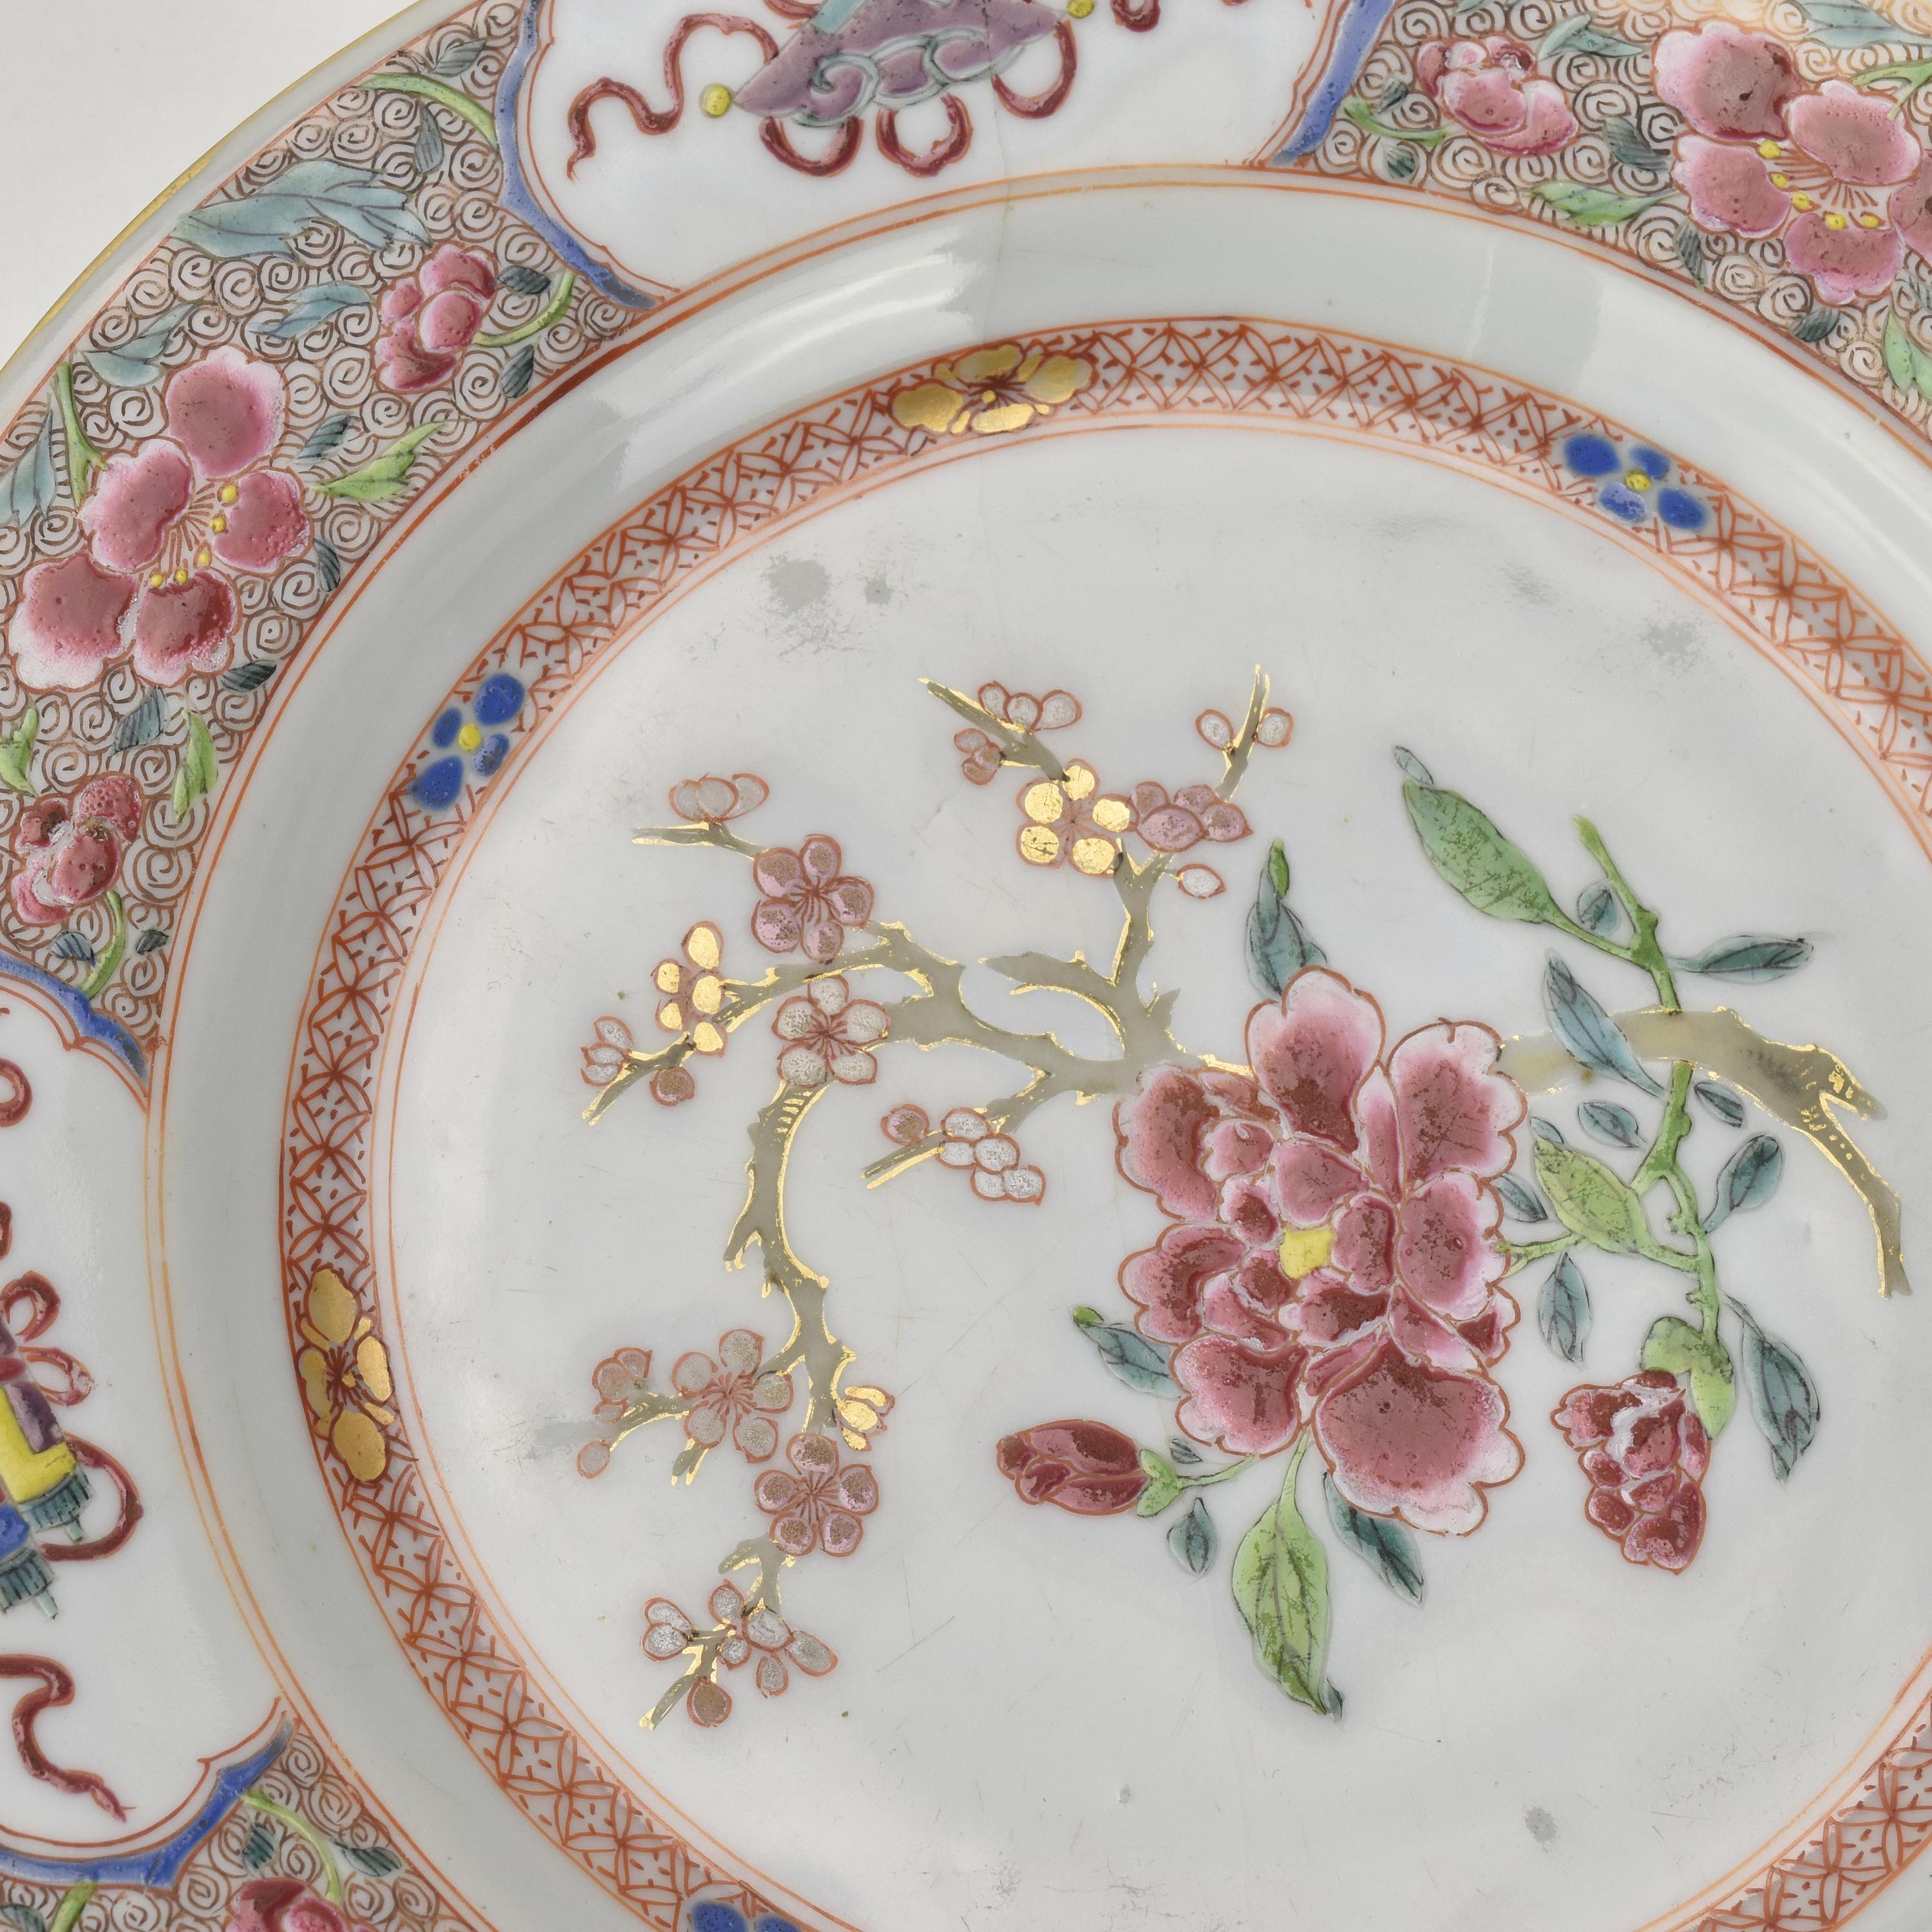 Antique Famille Verte Kangxi Period Chinese Porcelain Plate 18thC Famille Rose In Good Condition For Sale In Bad Säckingen, DE